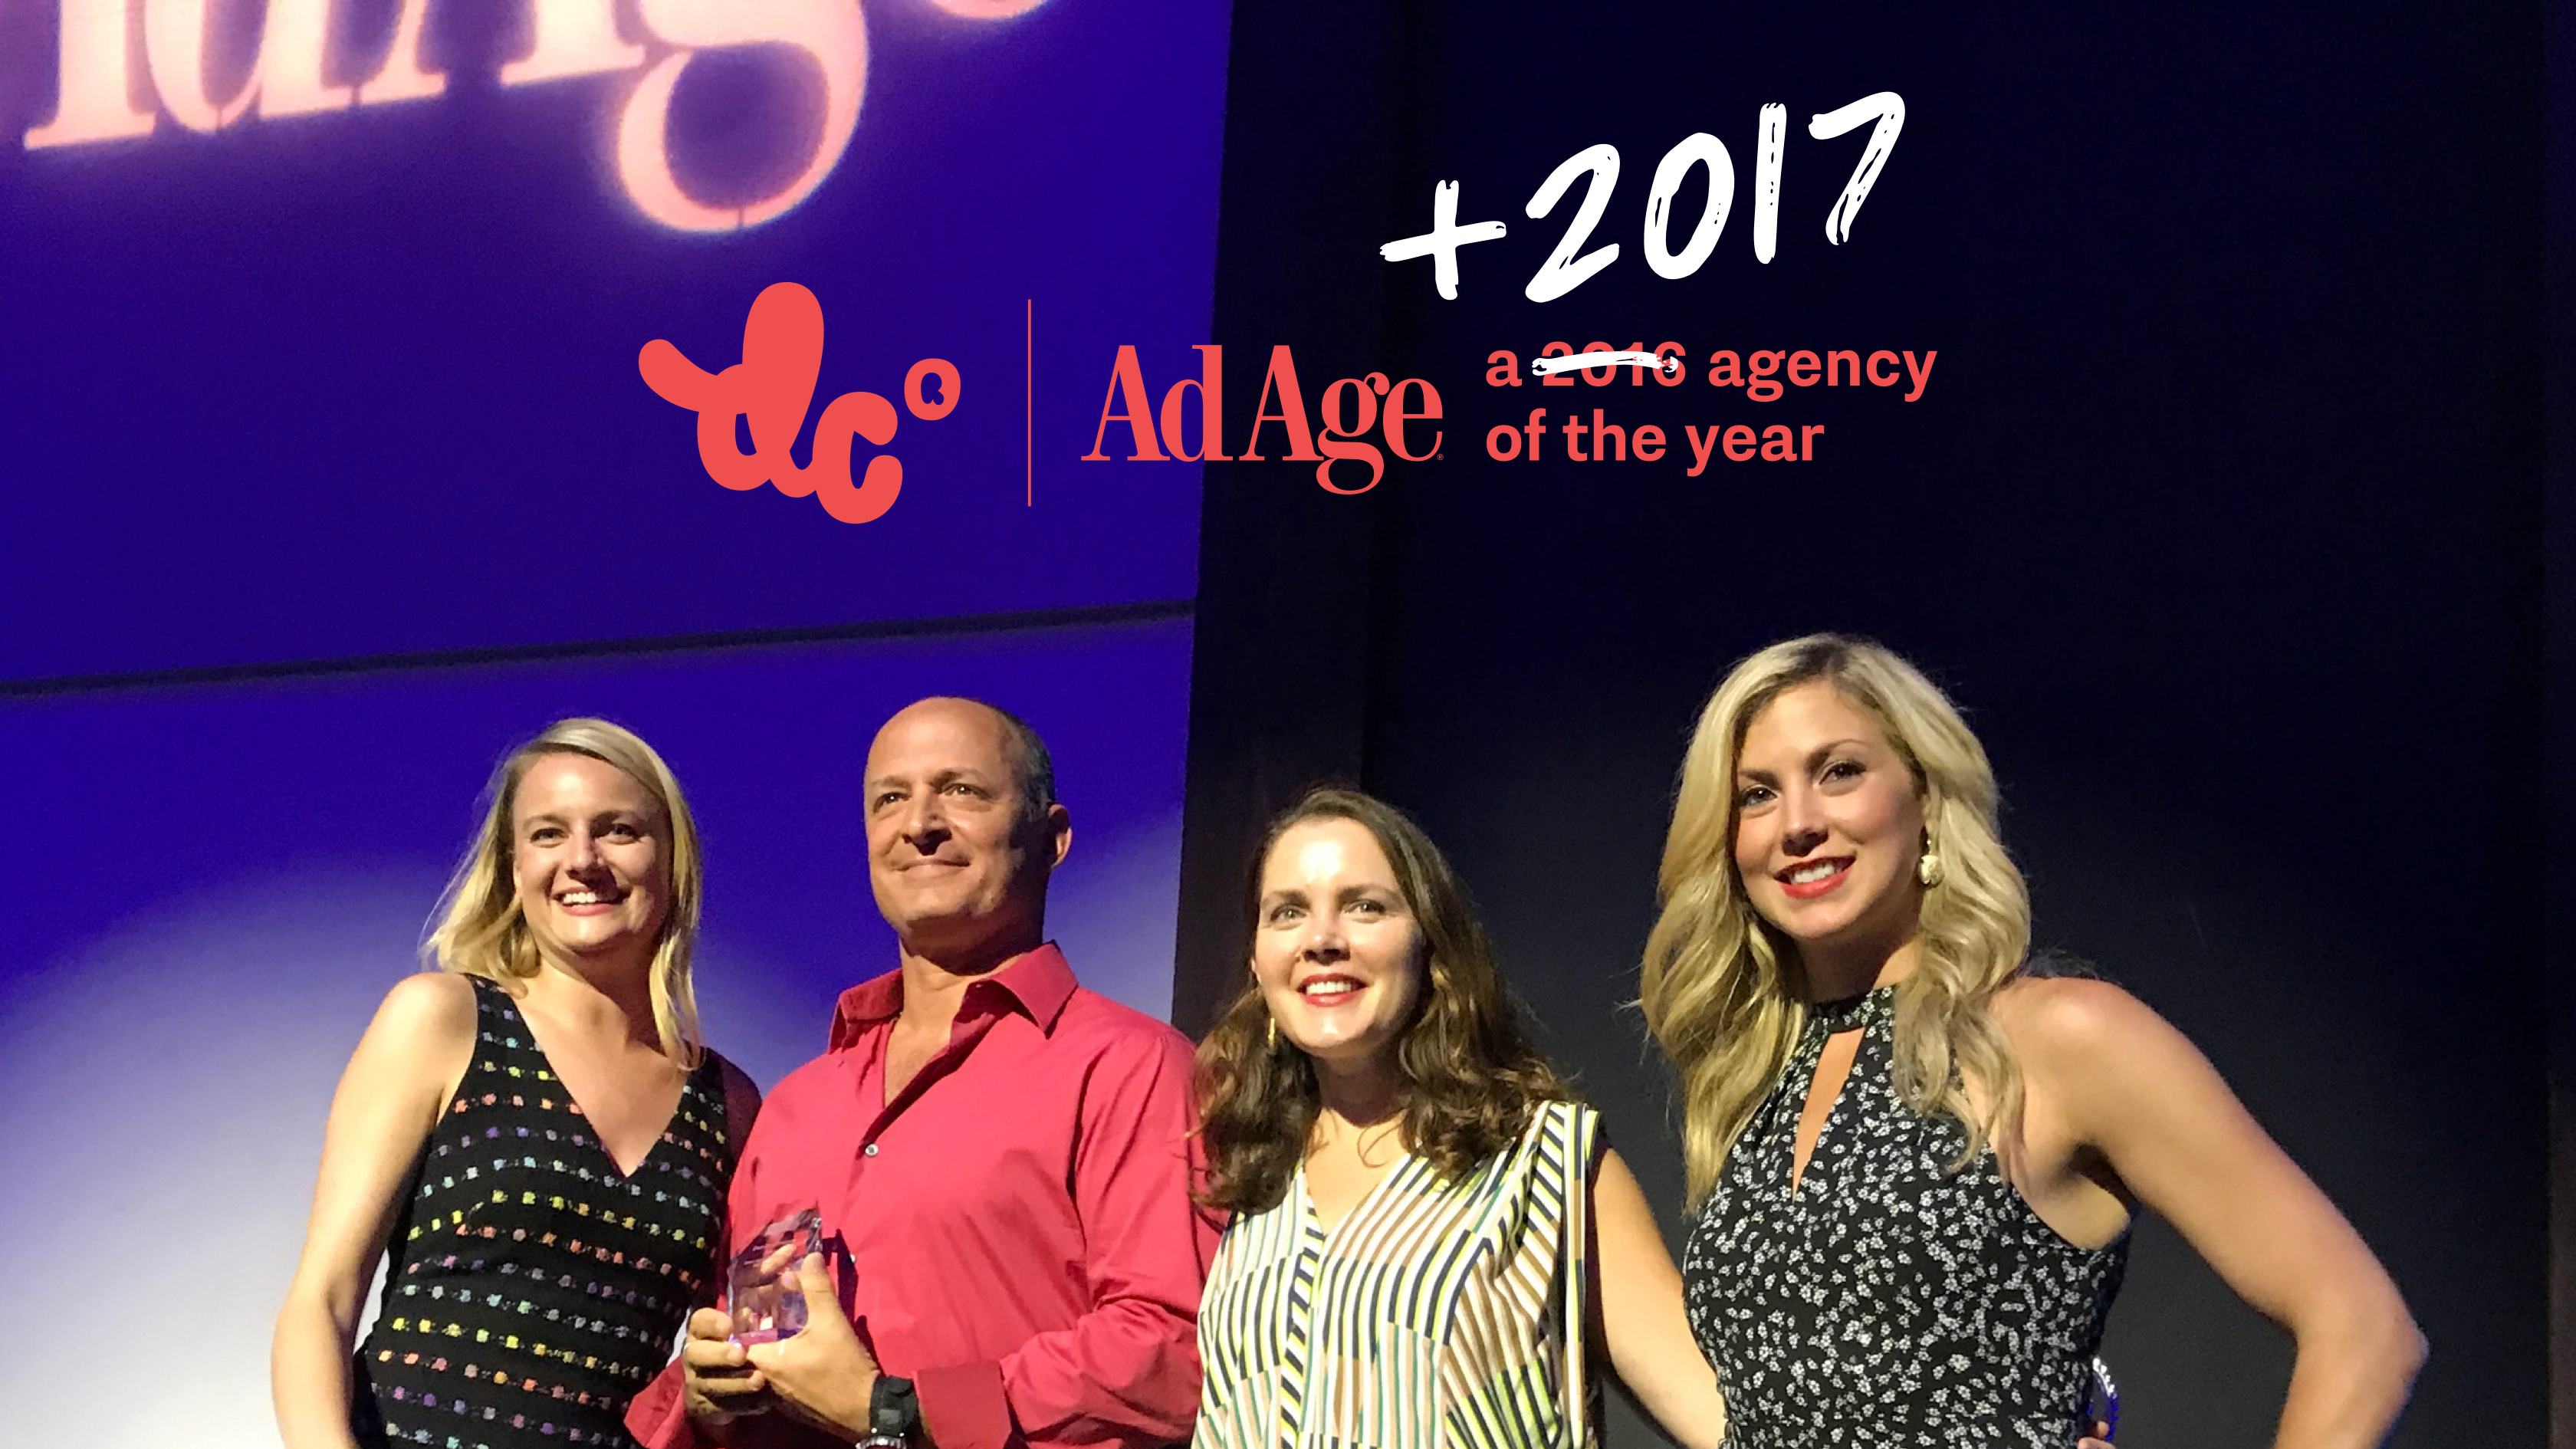 Ad Age Agency of the Year — again